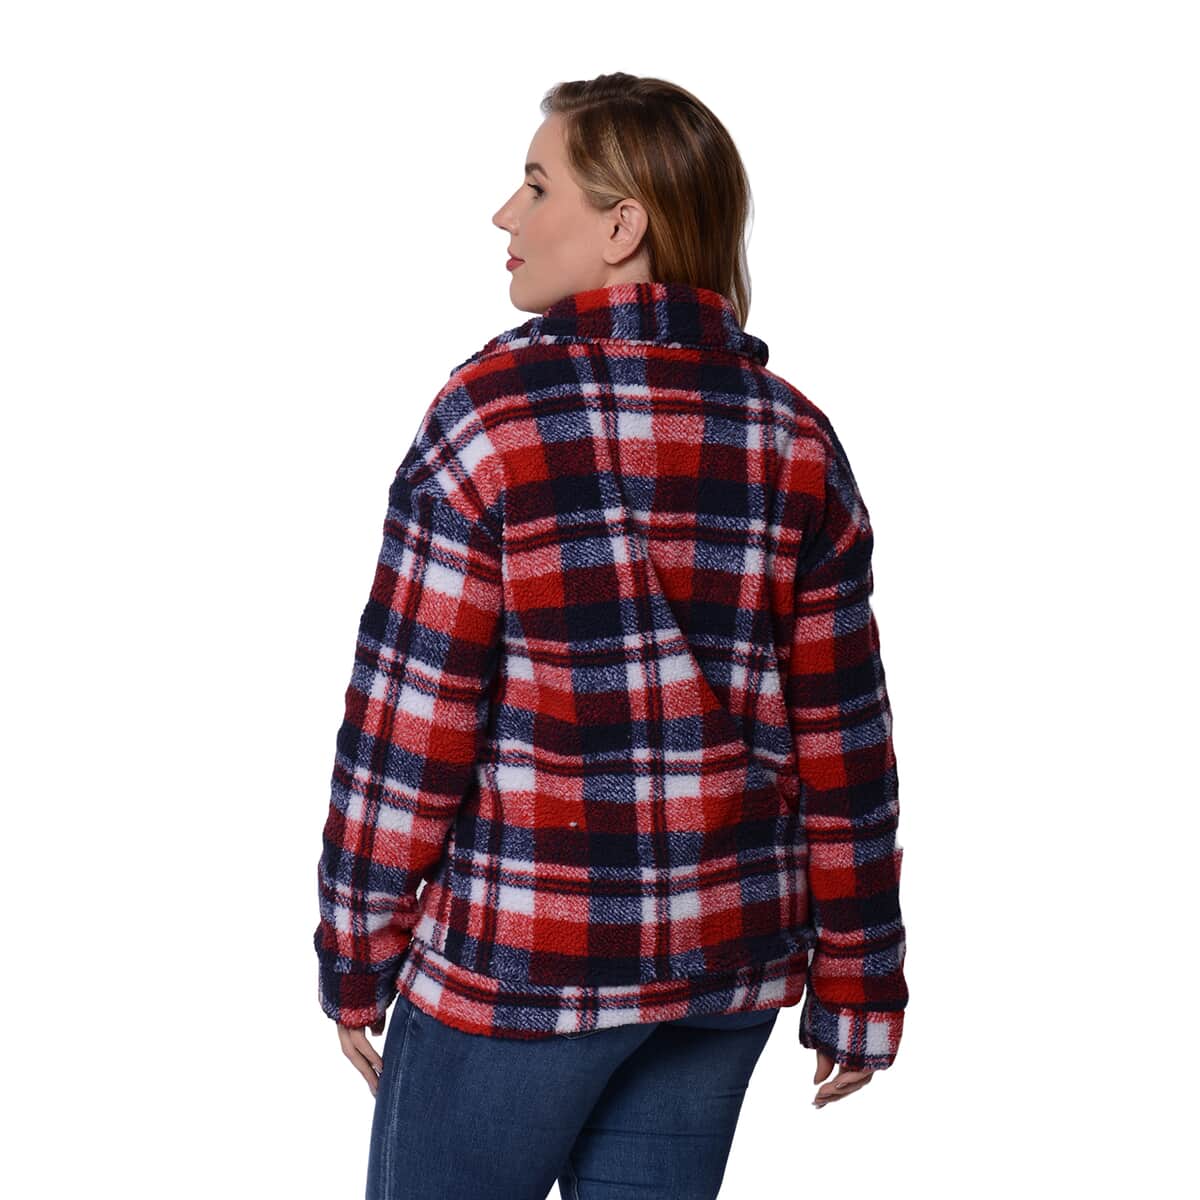 Passage Red and Blue Plaid Pattern Faux Fur Coat (M, 100% Polyester) image number 1